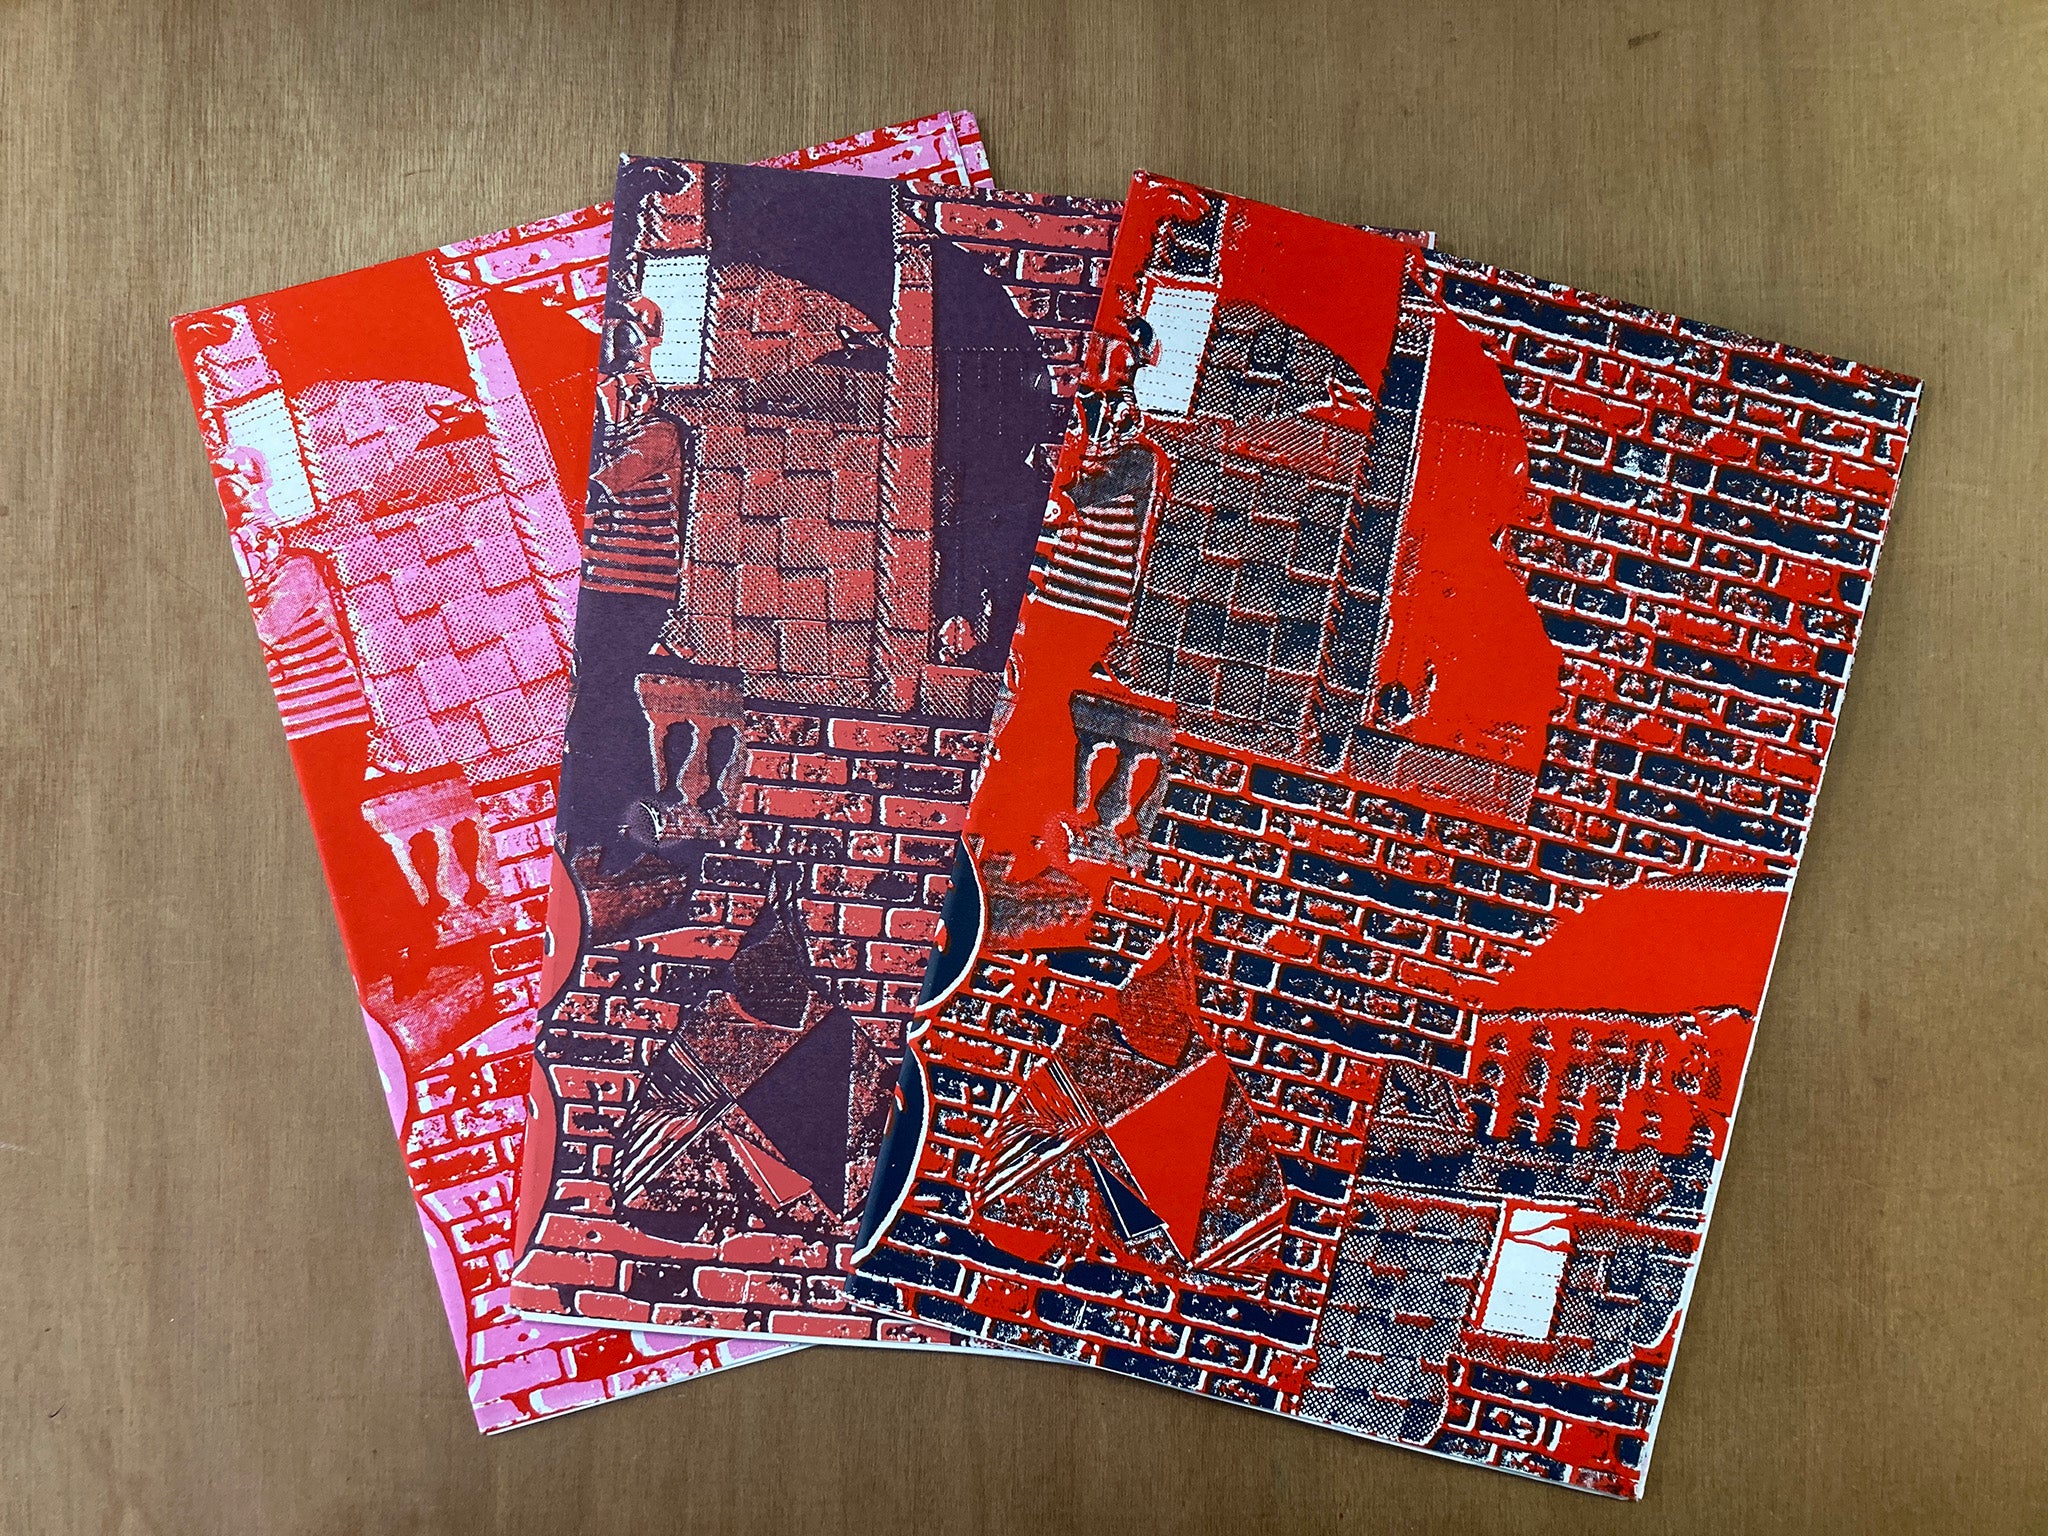 BOOK OF BRICKS by Claire Nico, Seb Ymai and Lee Stevens